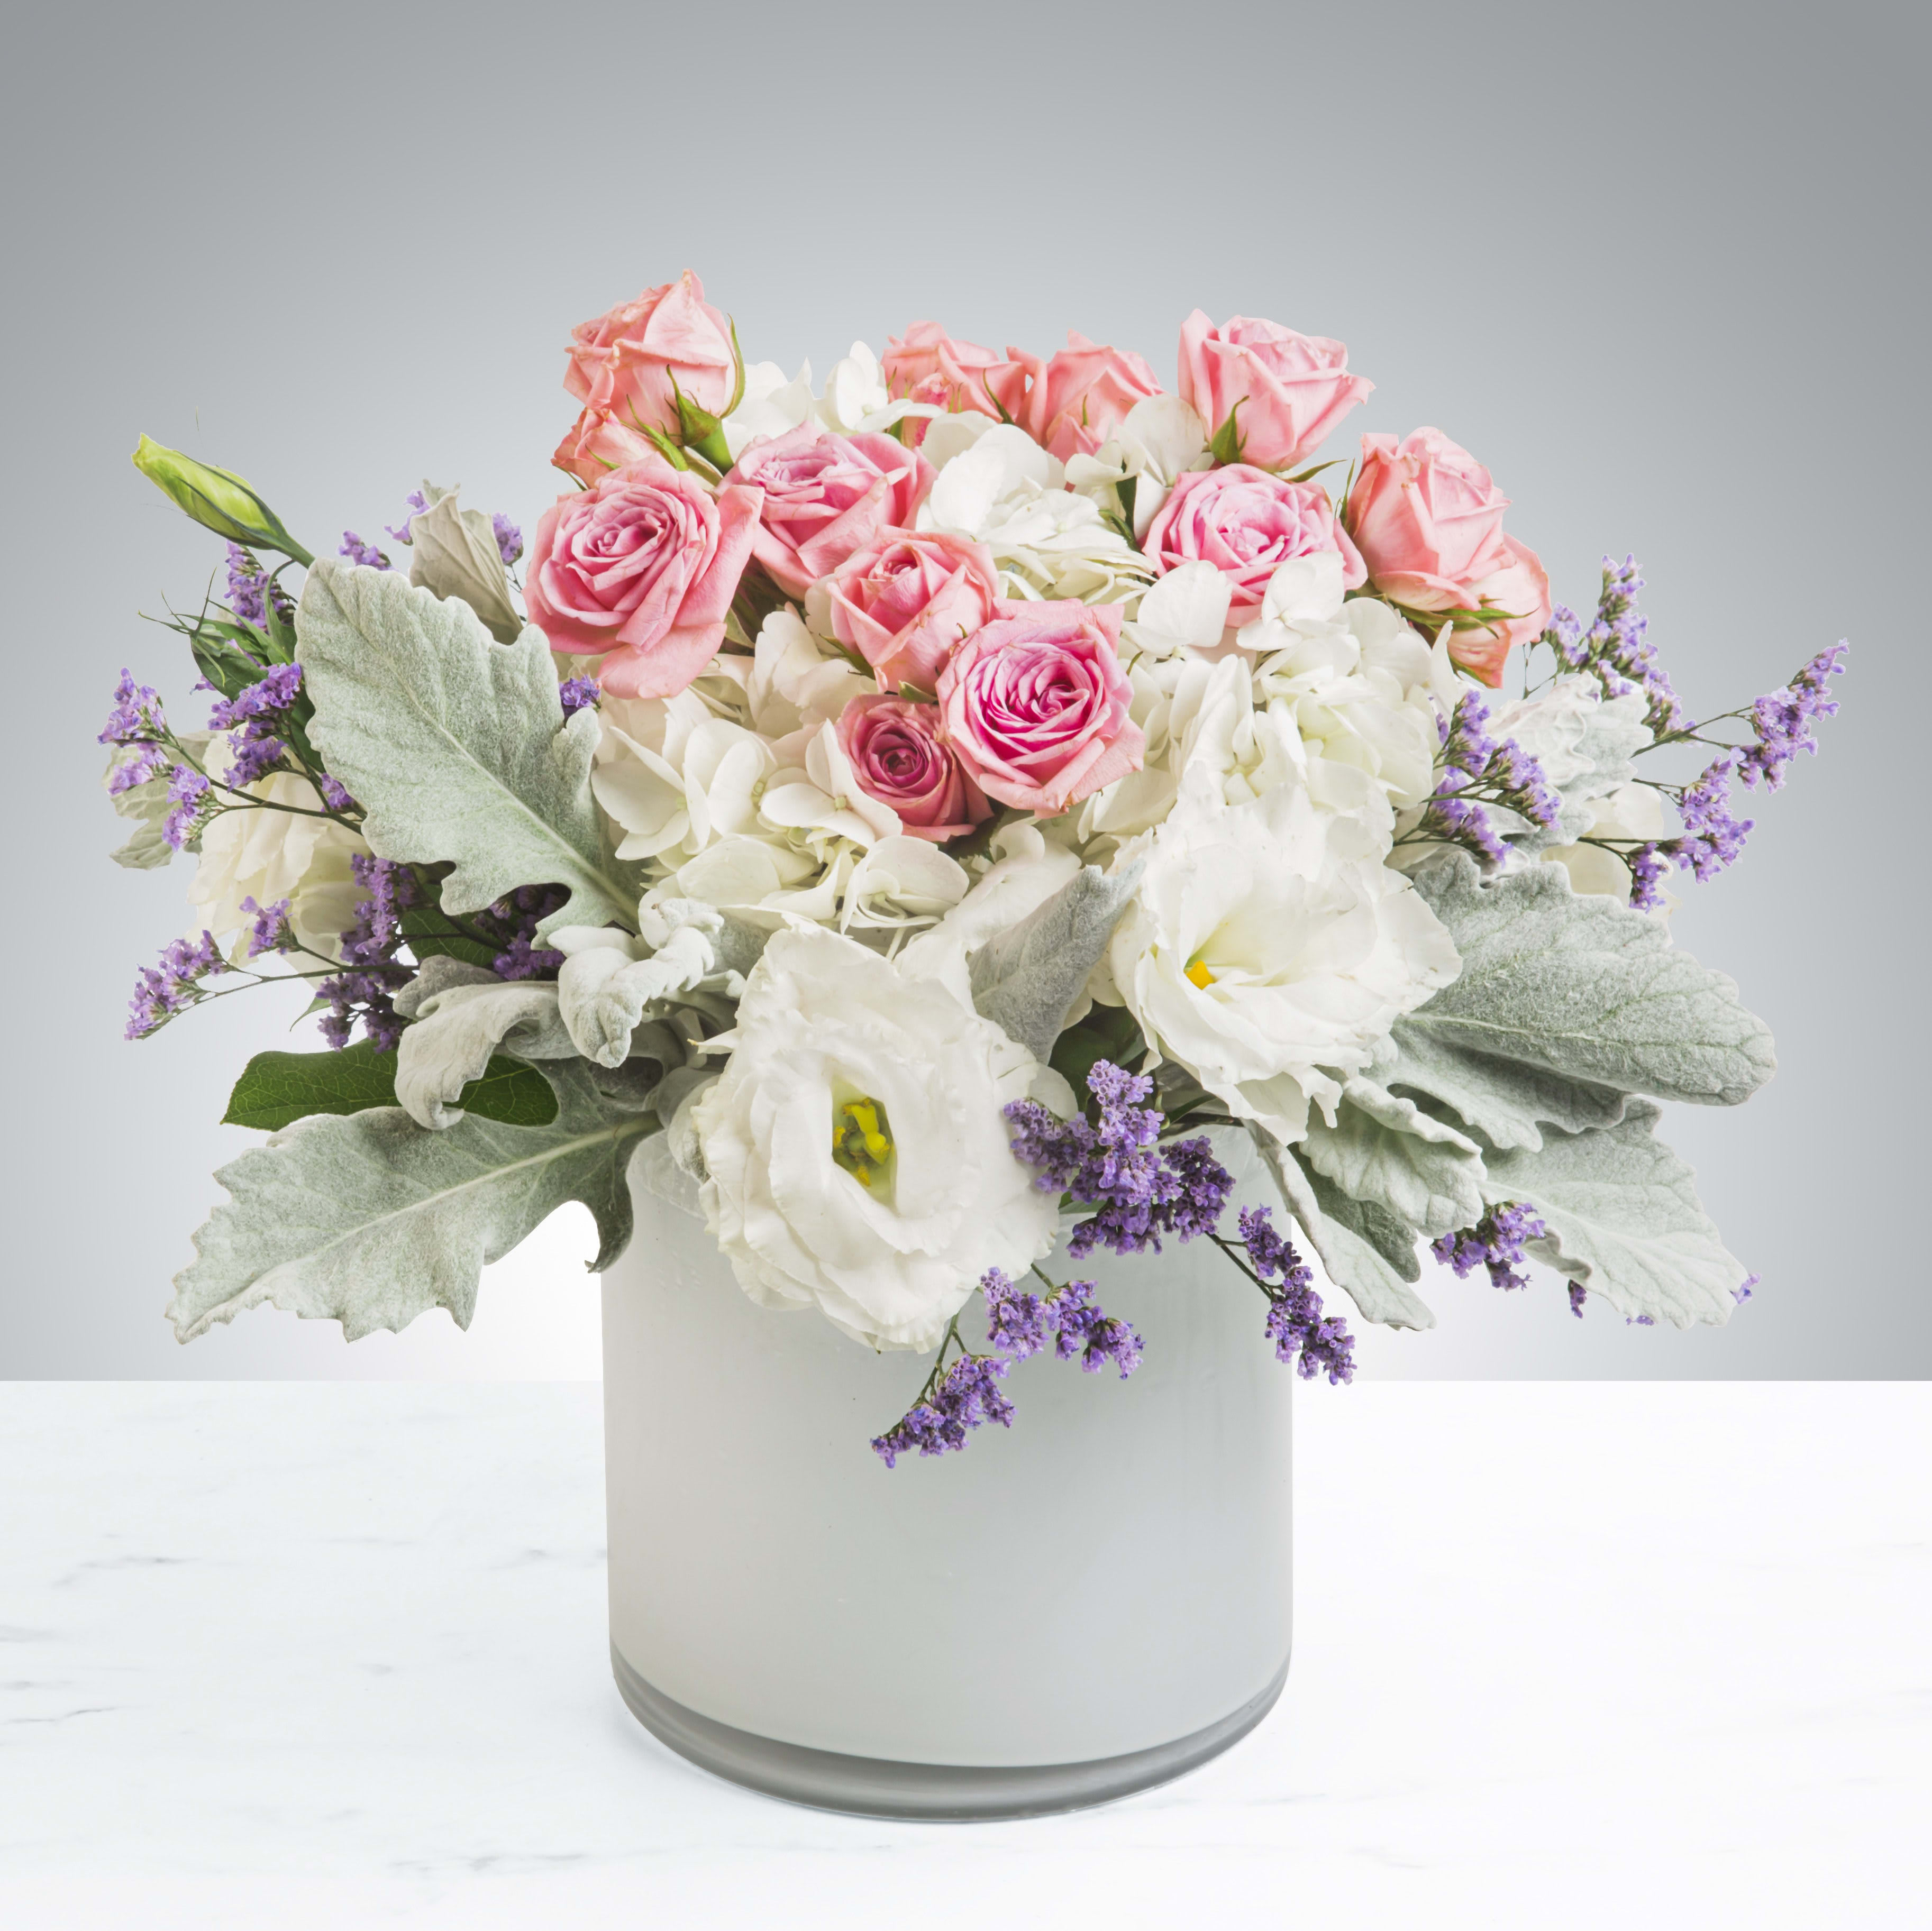 Sweet Cream  - This angelic arrangement is as cute as it is pretty. Featuring the soft texture of lambs ear and pastel colors, Sweet Cream is a warm hug and smile. Perfect for welcoming a new baby, a birthday or making somebody's day a little sweeter. The pot can be different color 